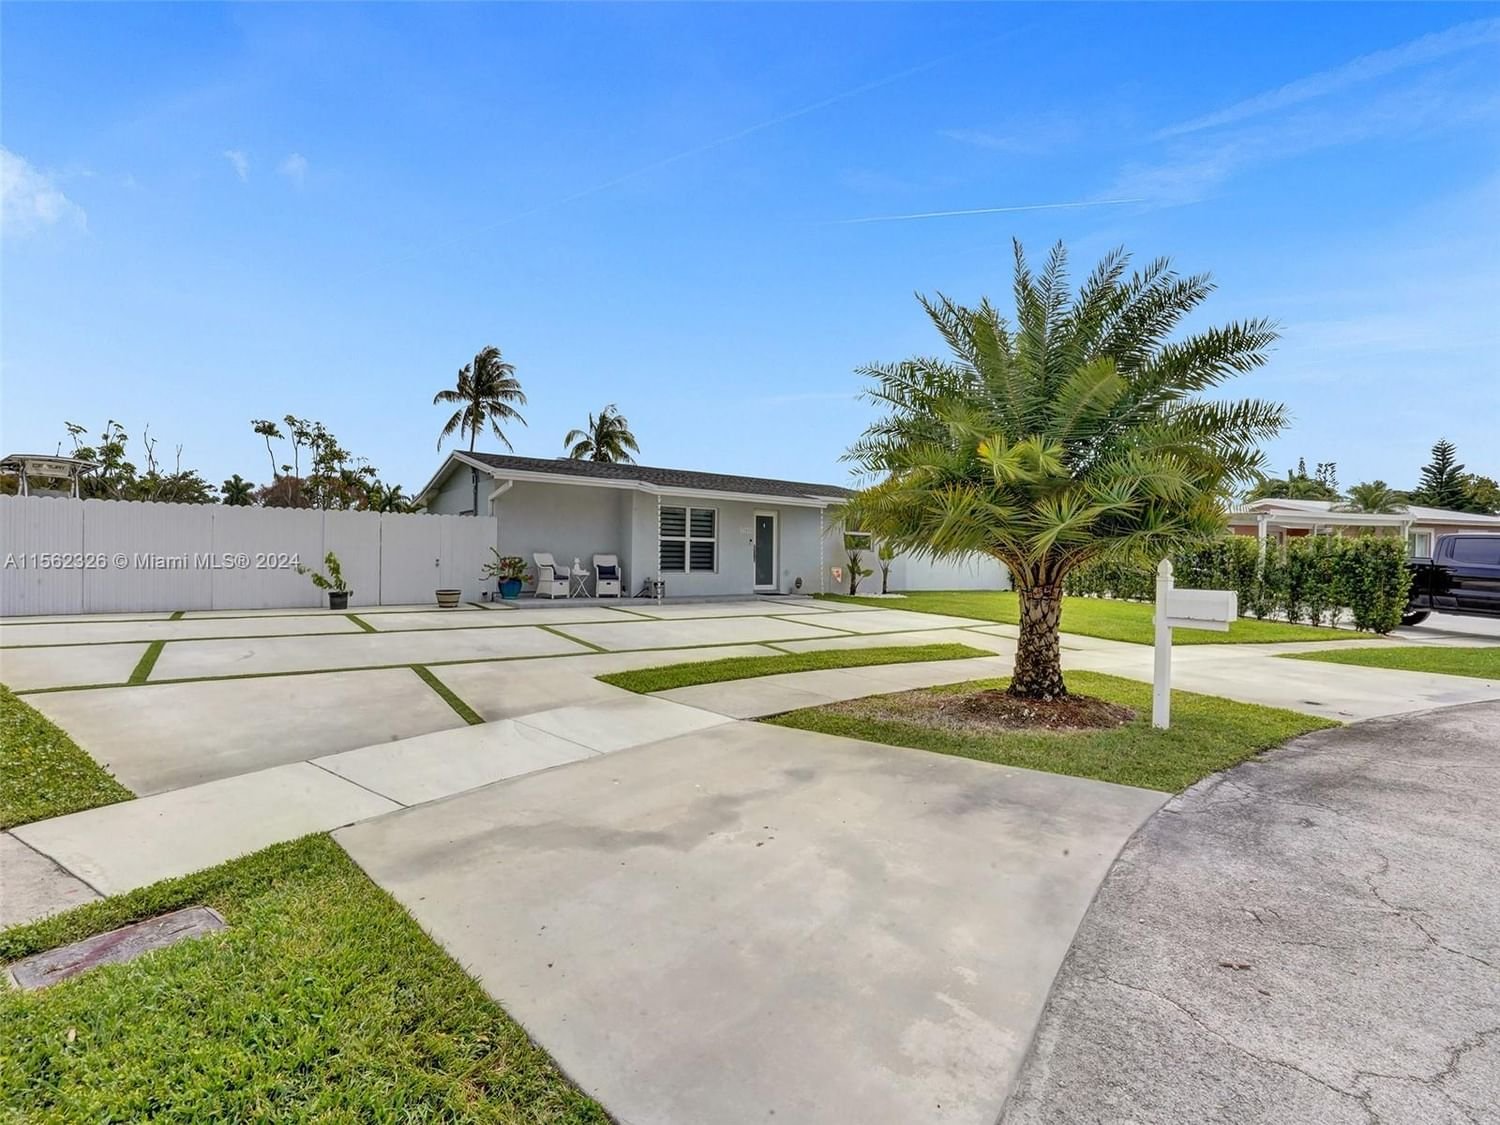 Real estate property located at 17425 77th Ct, Miami-Dade County, PALM SPRINGS NORTH SEC A, Hialeah, FL